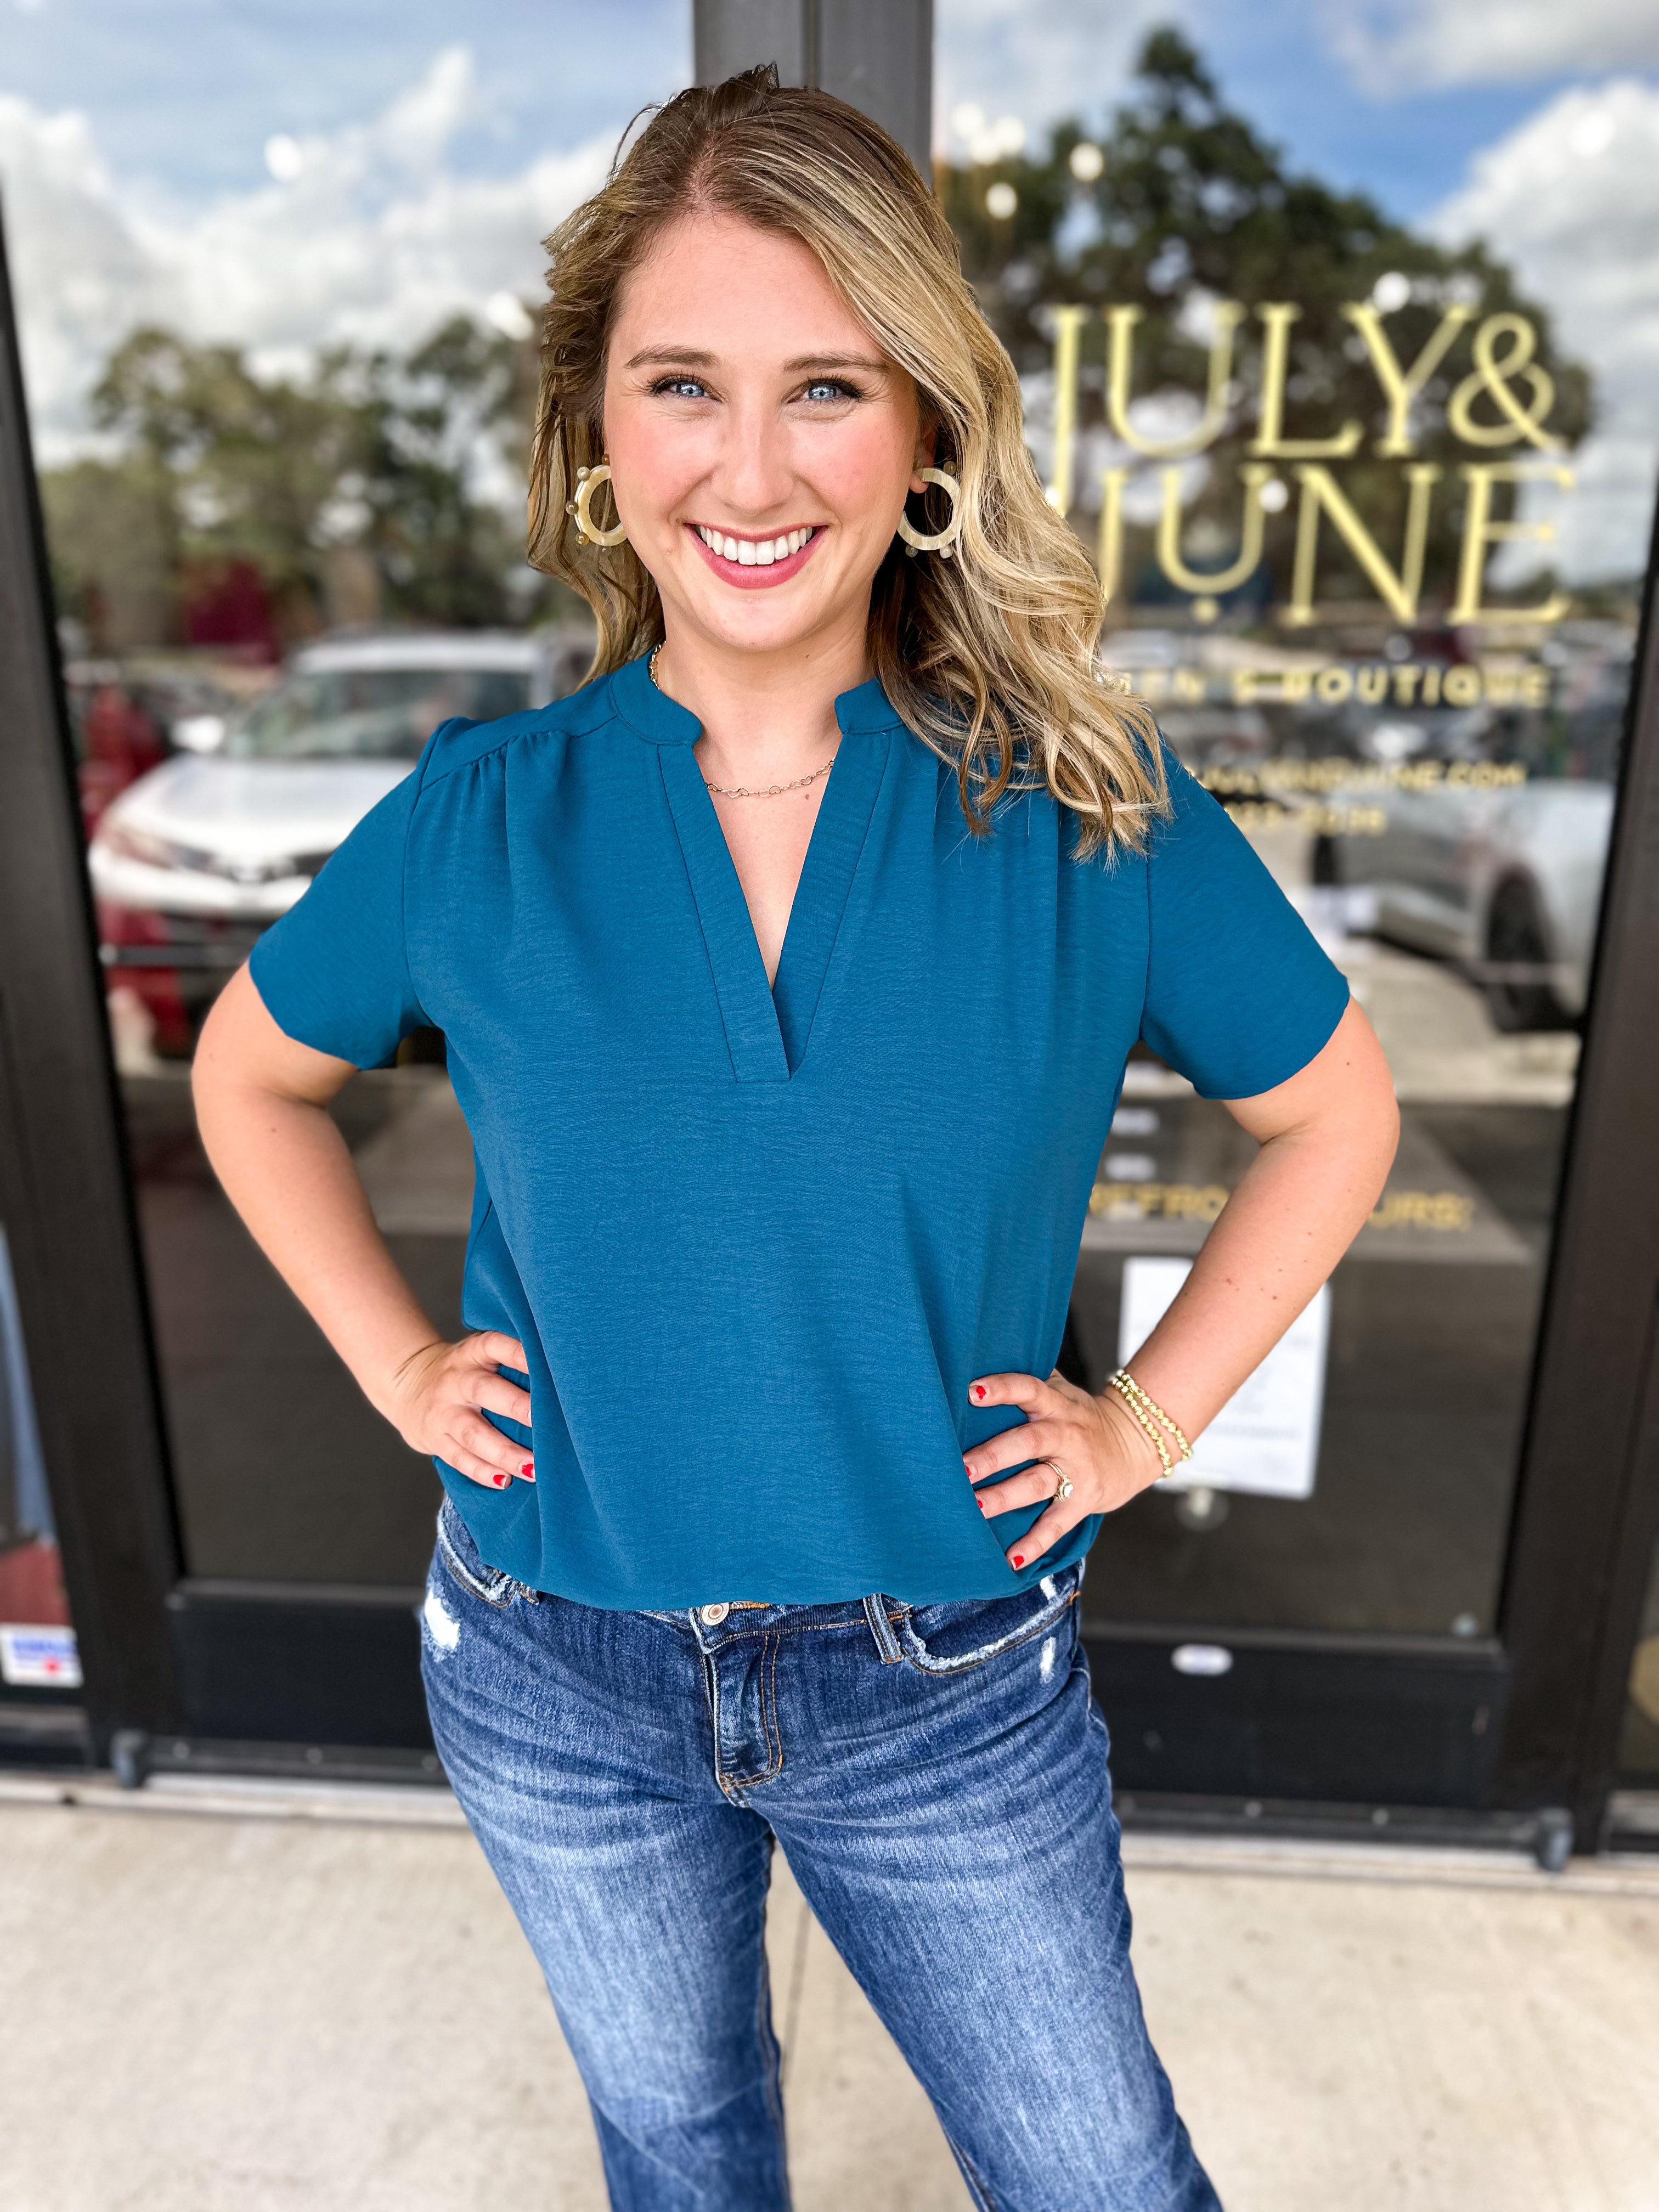 The Classic Cut Blouse - Teal-200 Fashion Blouses-ENTRO-July & June Women's Fashion Boutique Located in San Antonio, Texas